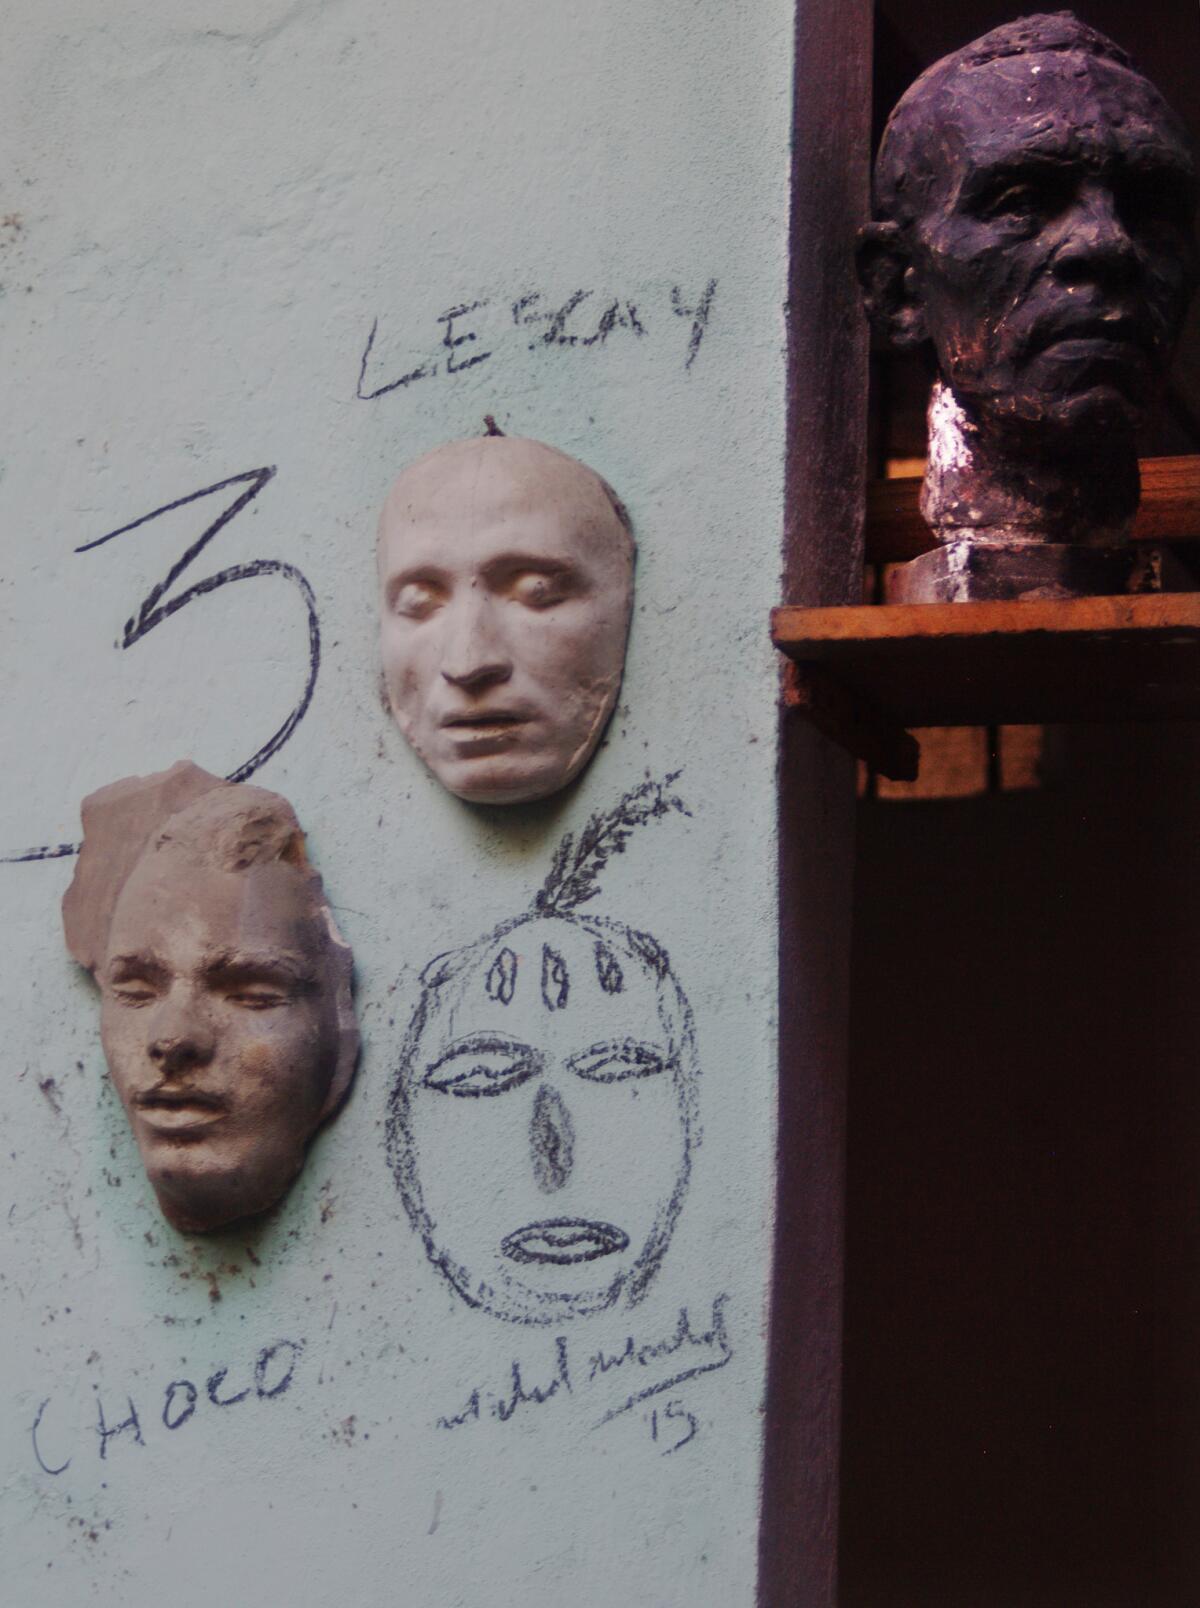 Sculptures at the workshop of Cuban artist Alberto Lescay. (Randy Lewis / Los Angeles Times)